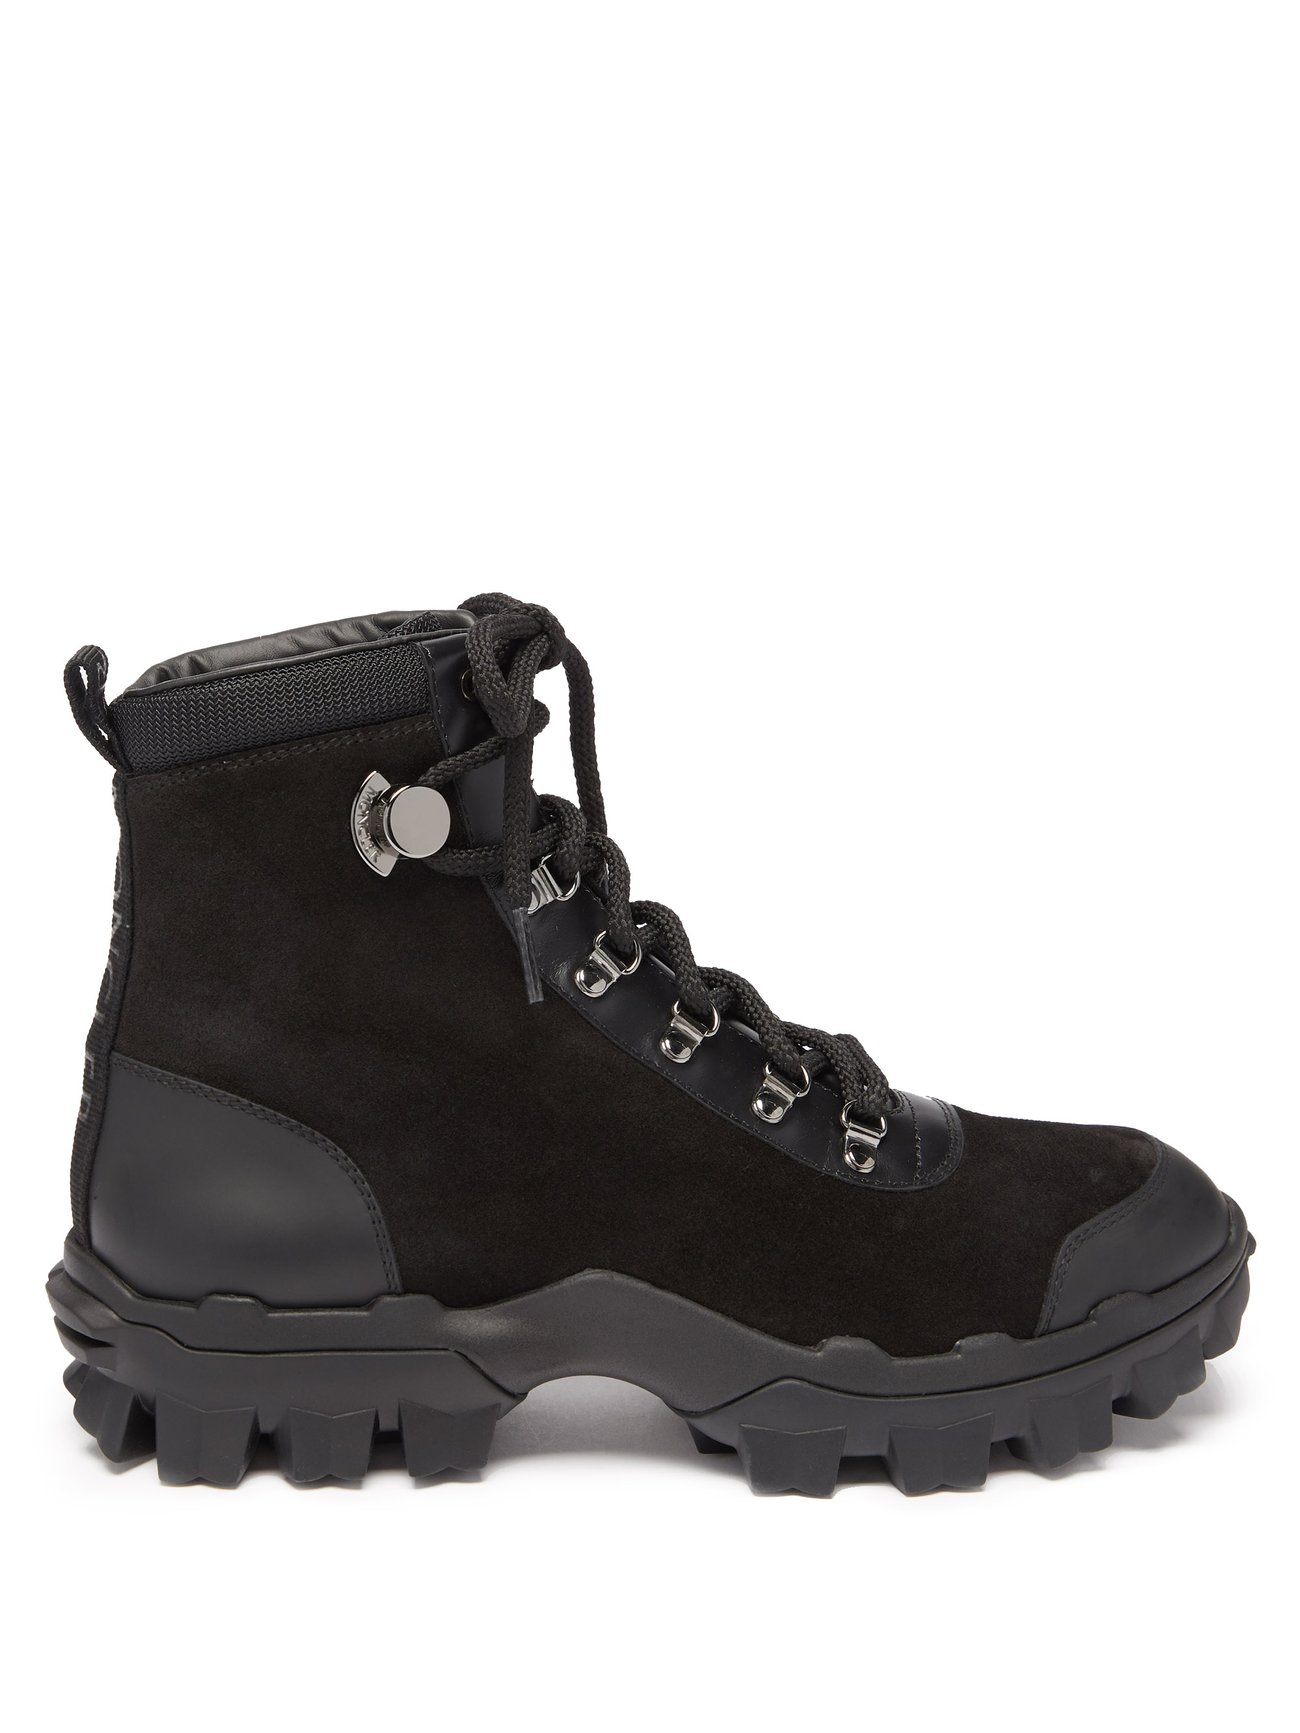 Moncler Grenoble Silver Winter Hiking Boots Moncler Grenoble